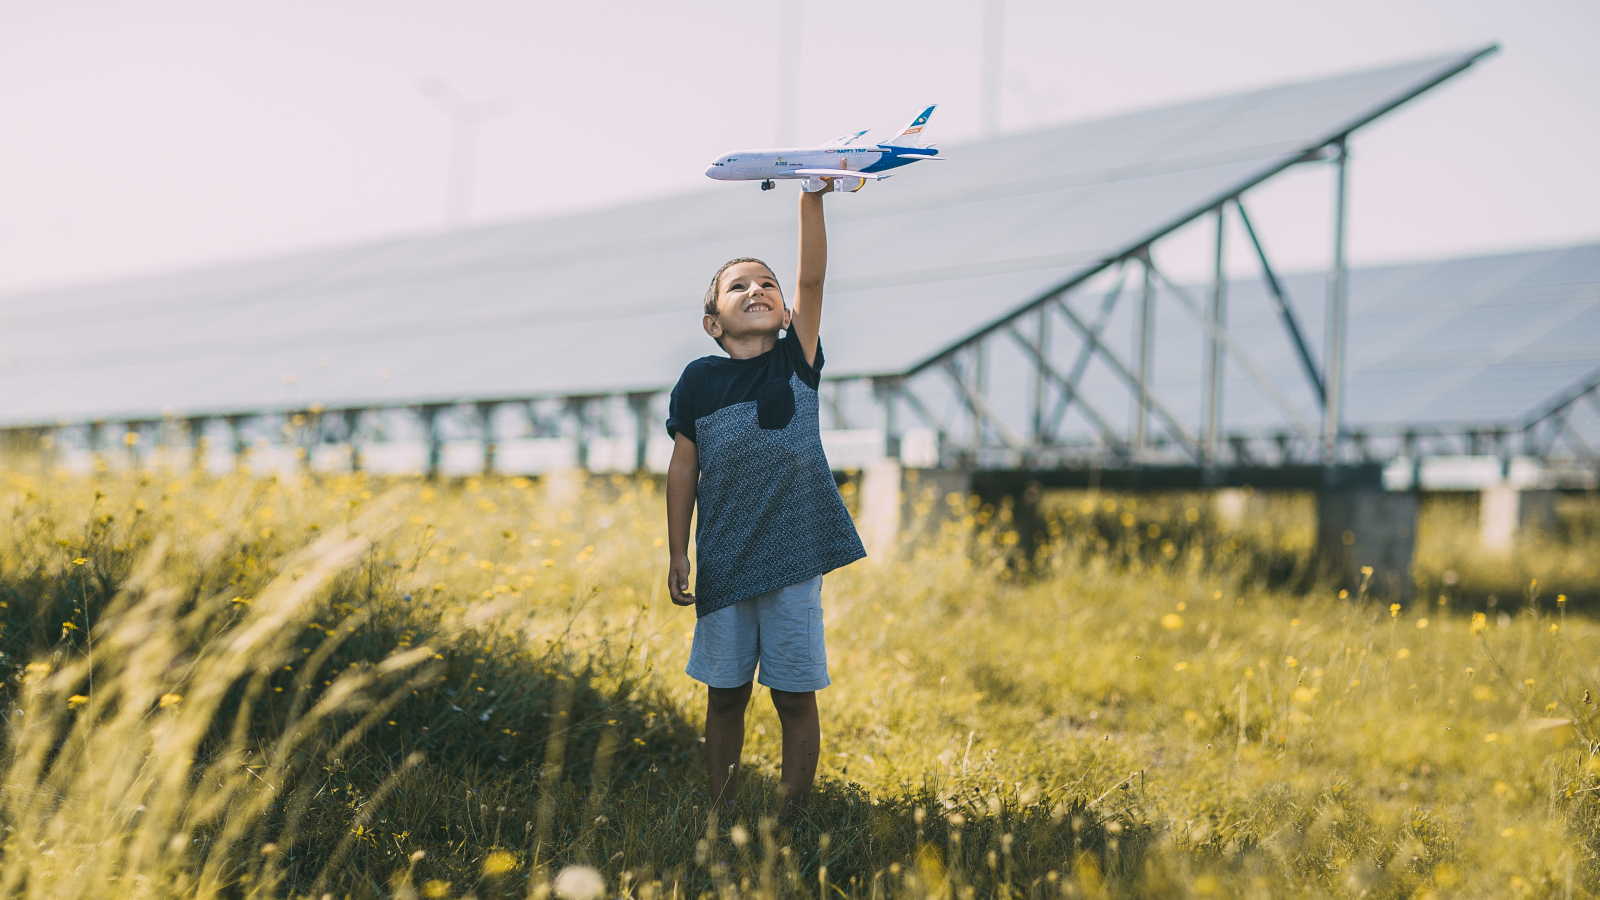 EU Sustainable Energy Week 2019: Organise an Energy Day in your town or city!